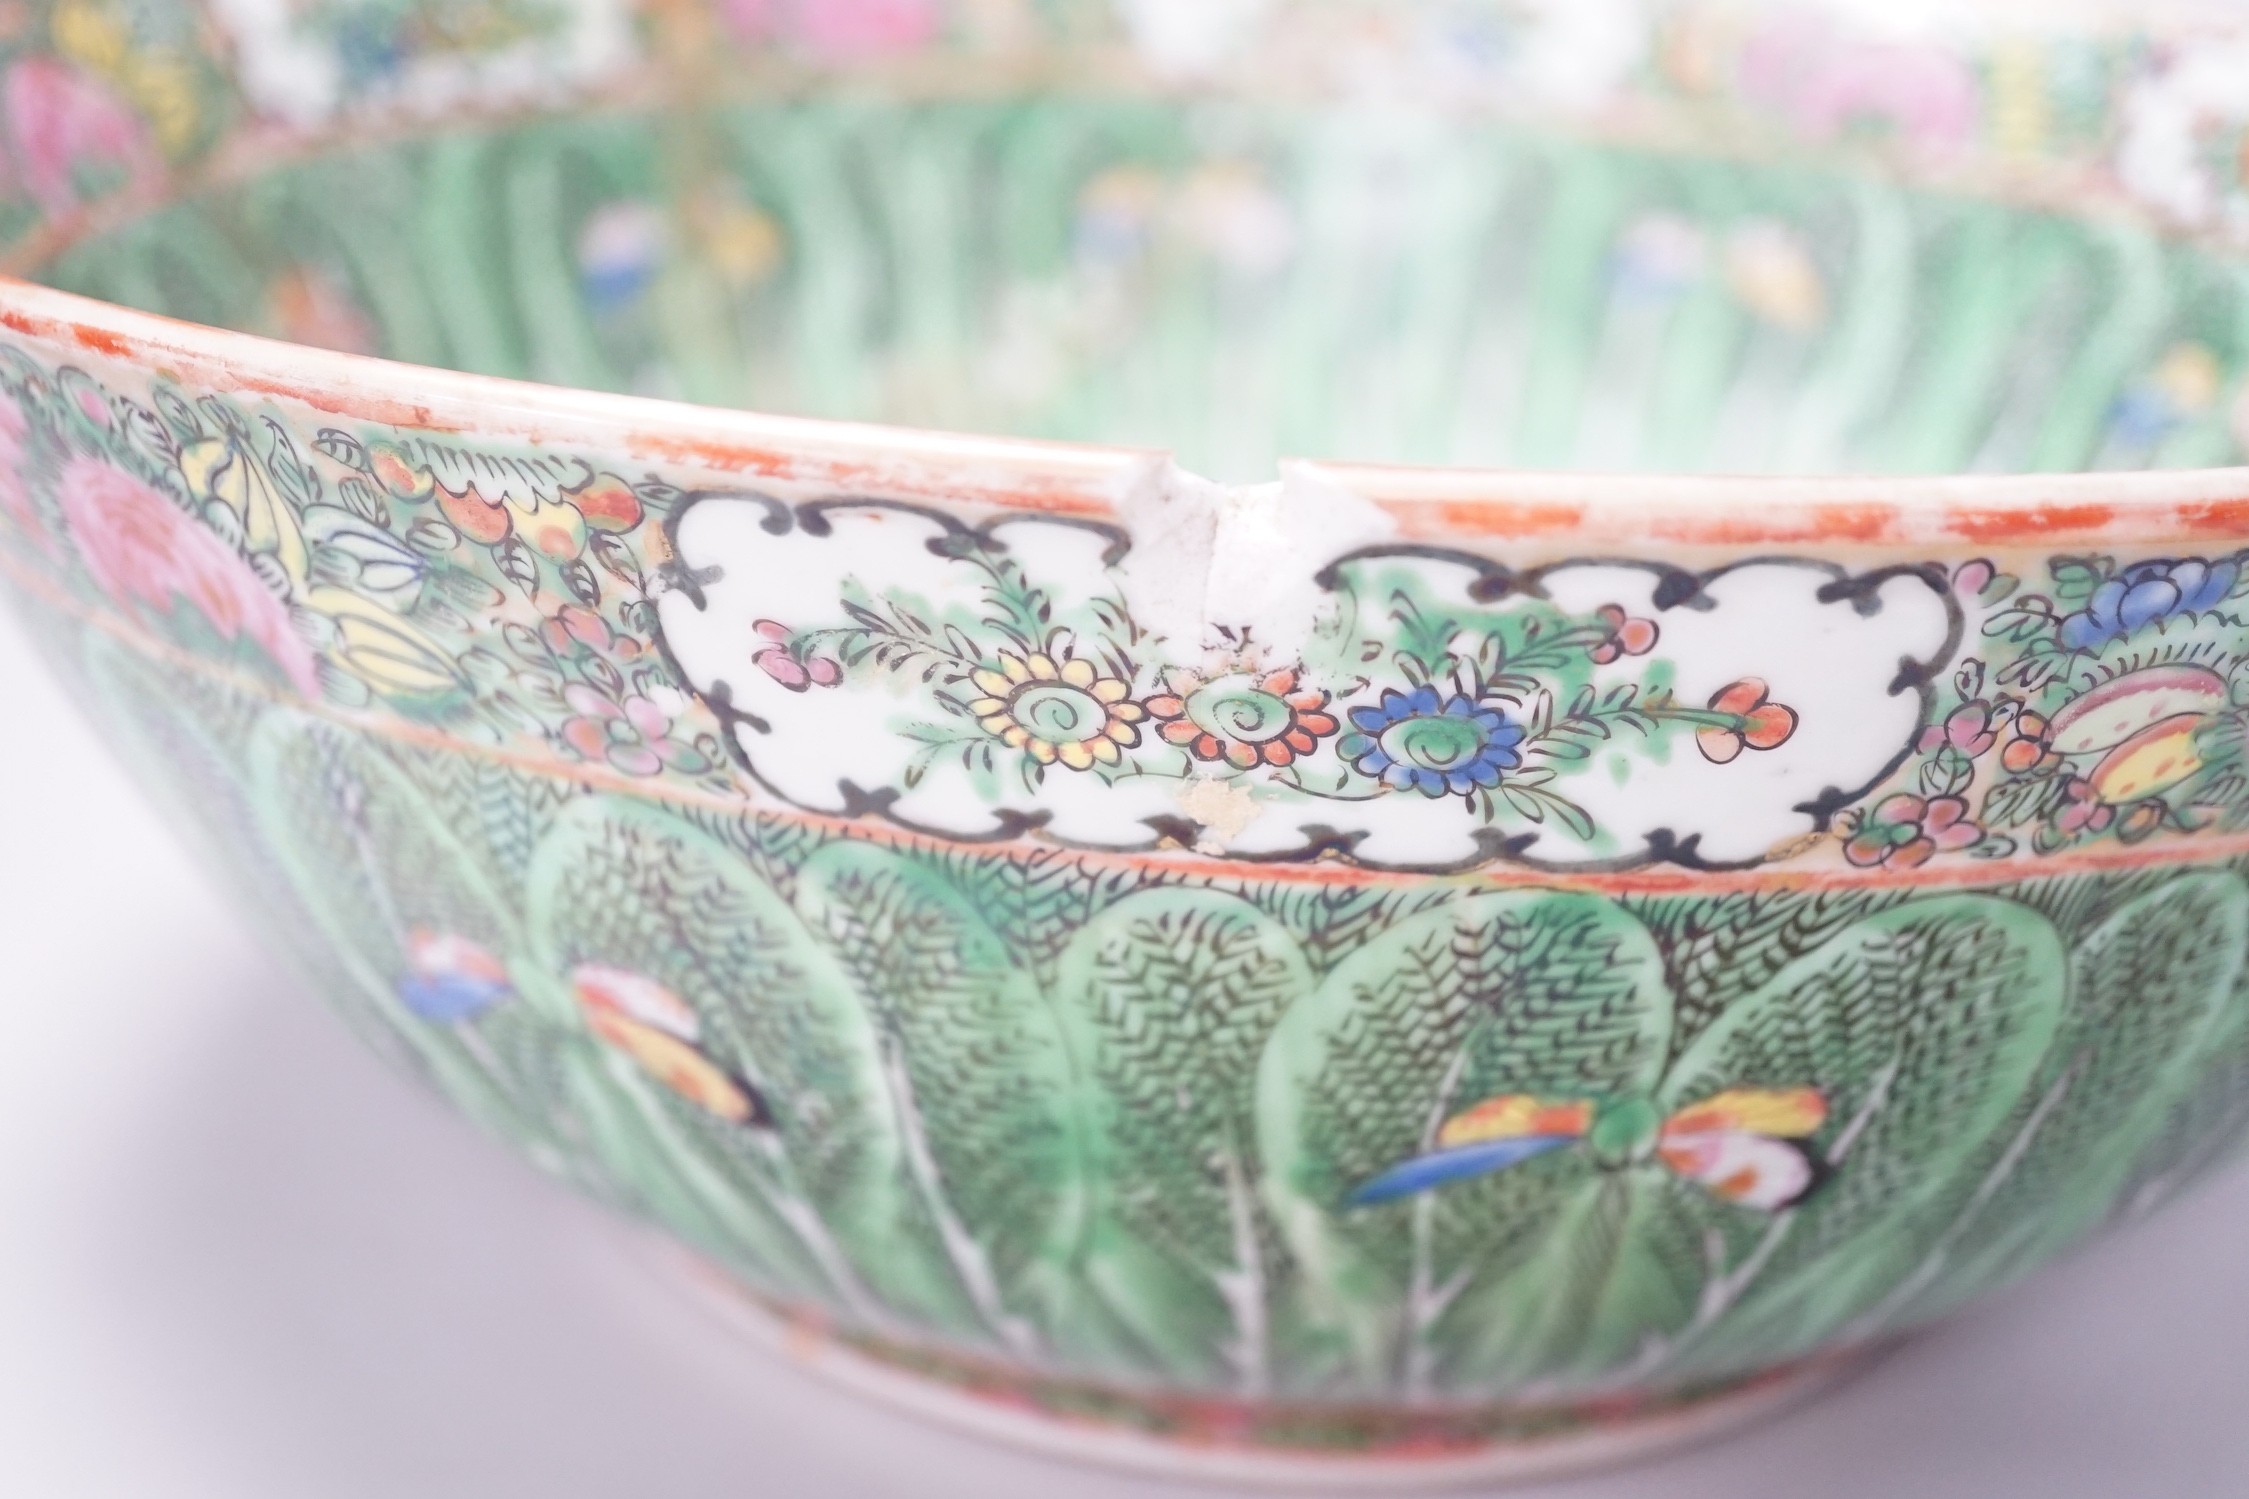 A large Chinese Canton famille rose ‘cabbage’ punch bowl, early 20th century, 37cm diameter